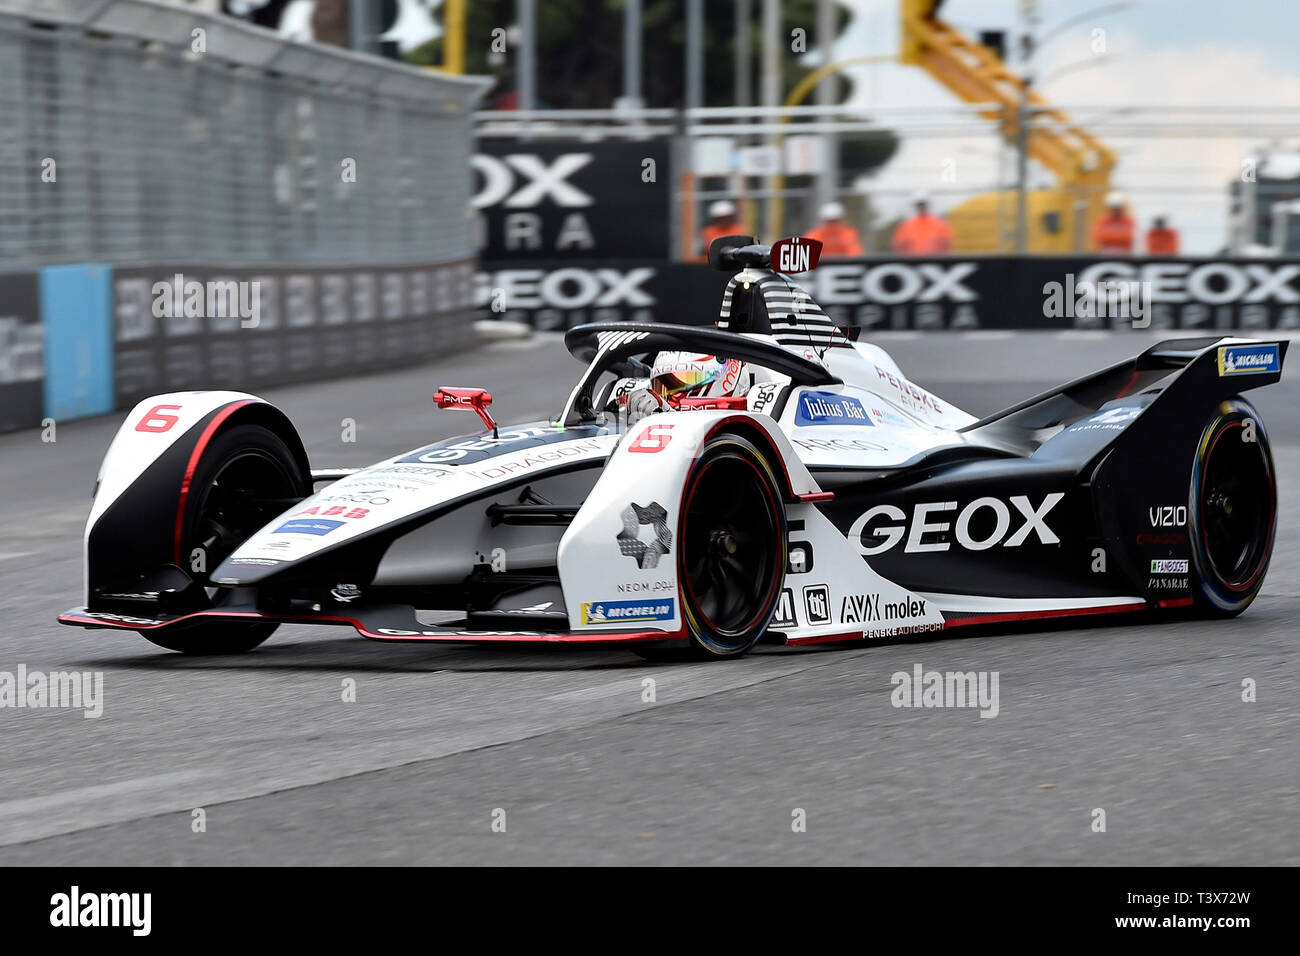 Rome, Italy. 12th Apr 2019. Maximilian Gunther ( GEOX Dragon ) during the  shakedown before the 2019 GEOX Rome E-Prix at Circuto Cittadino dell'EUR,  Rome, Italy on 12 April 2019. Photo by